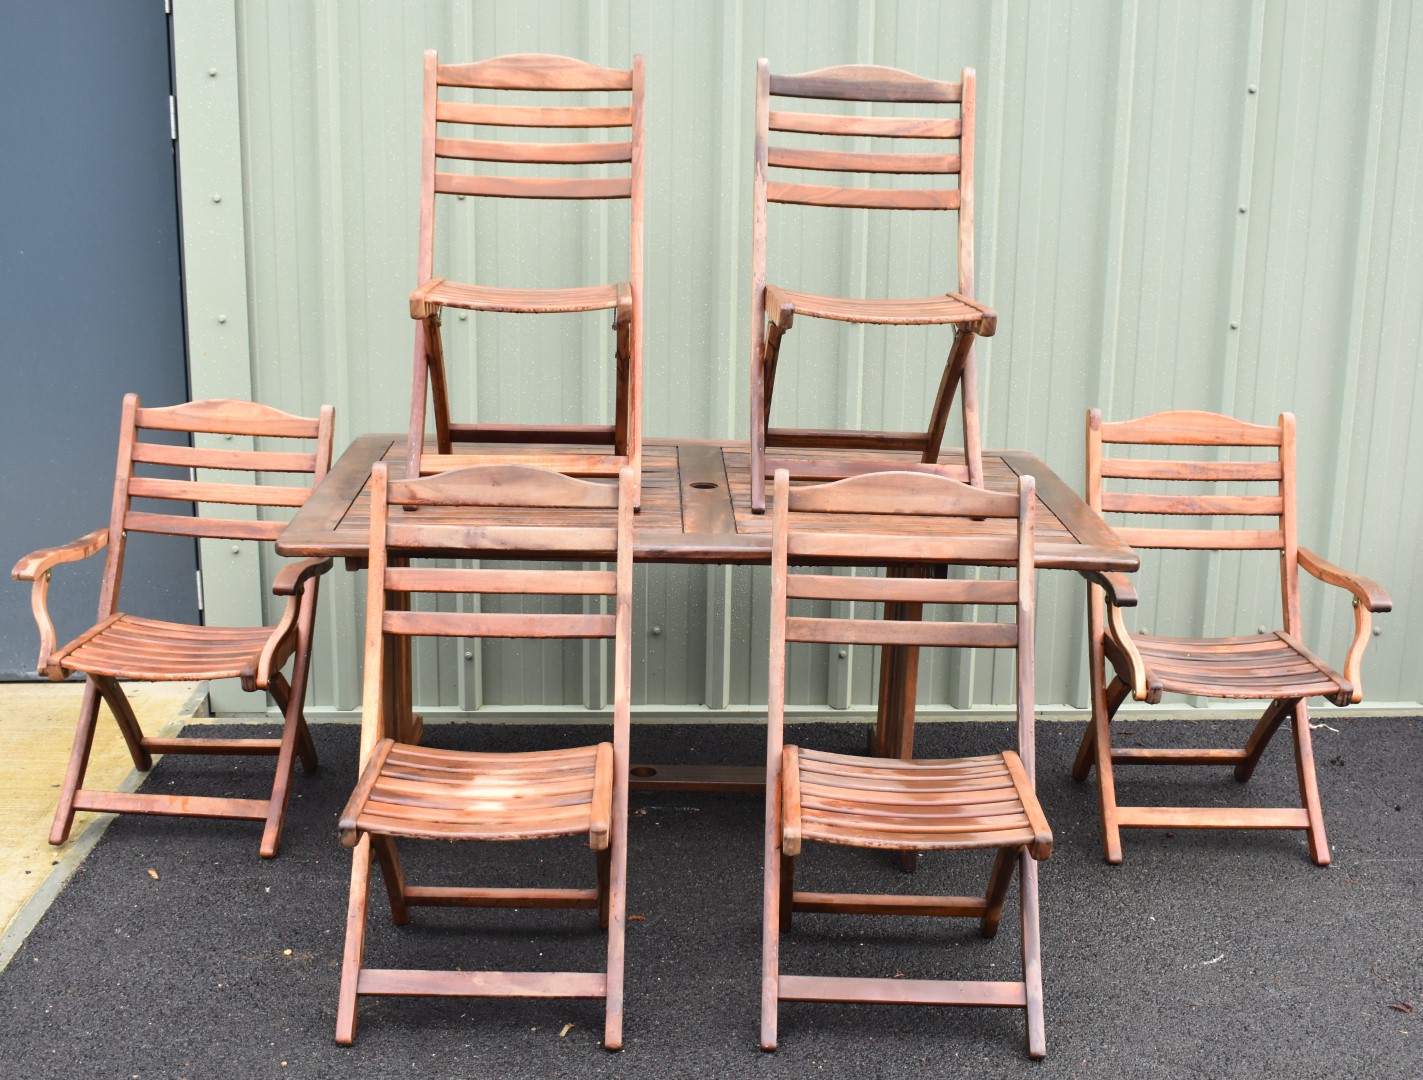 Teak garden table and six (2+4) folding chairs by Alexander Rose, table L165 x W100 x H72cm